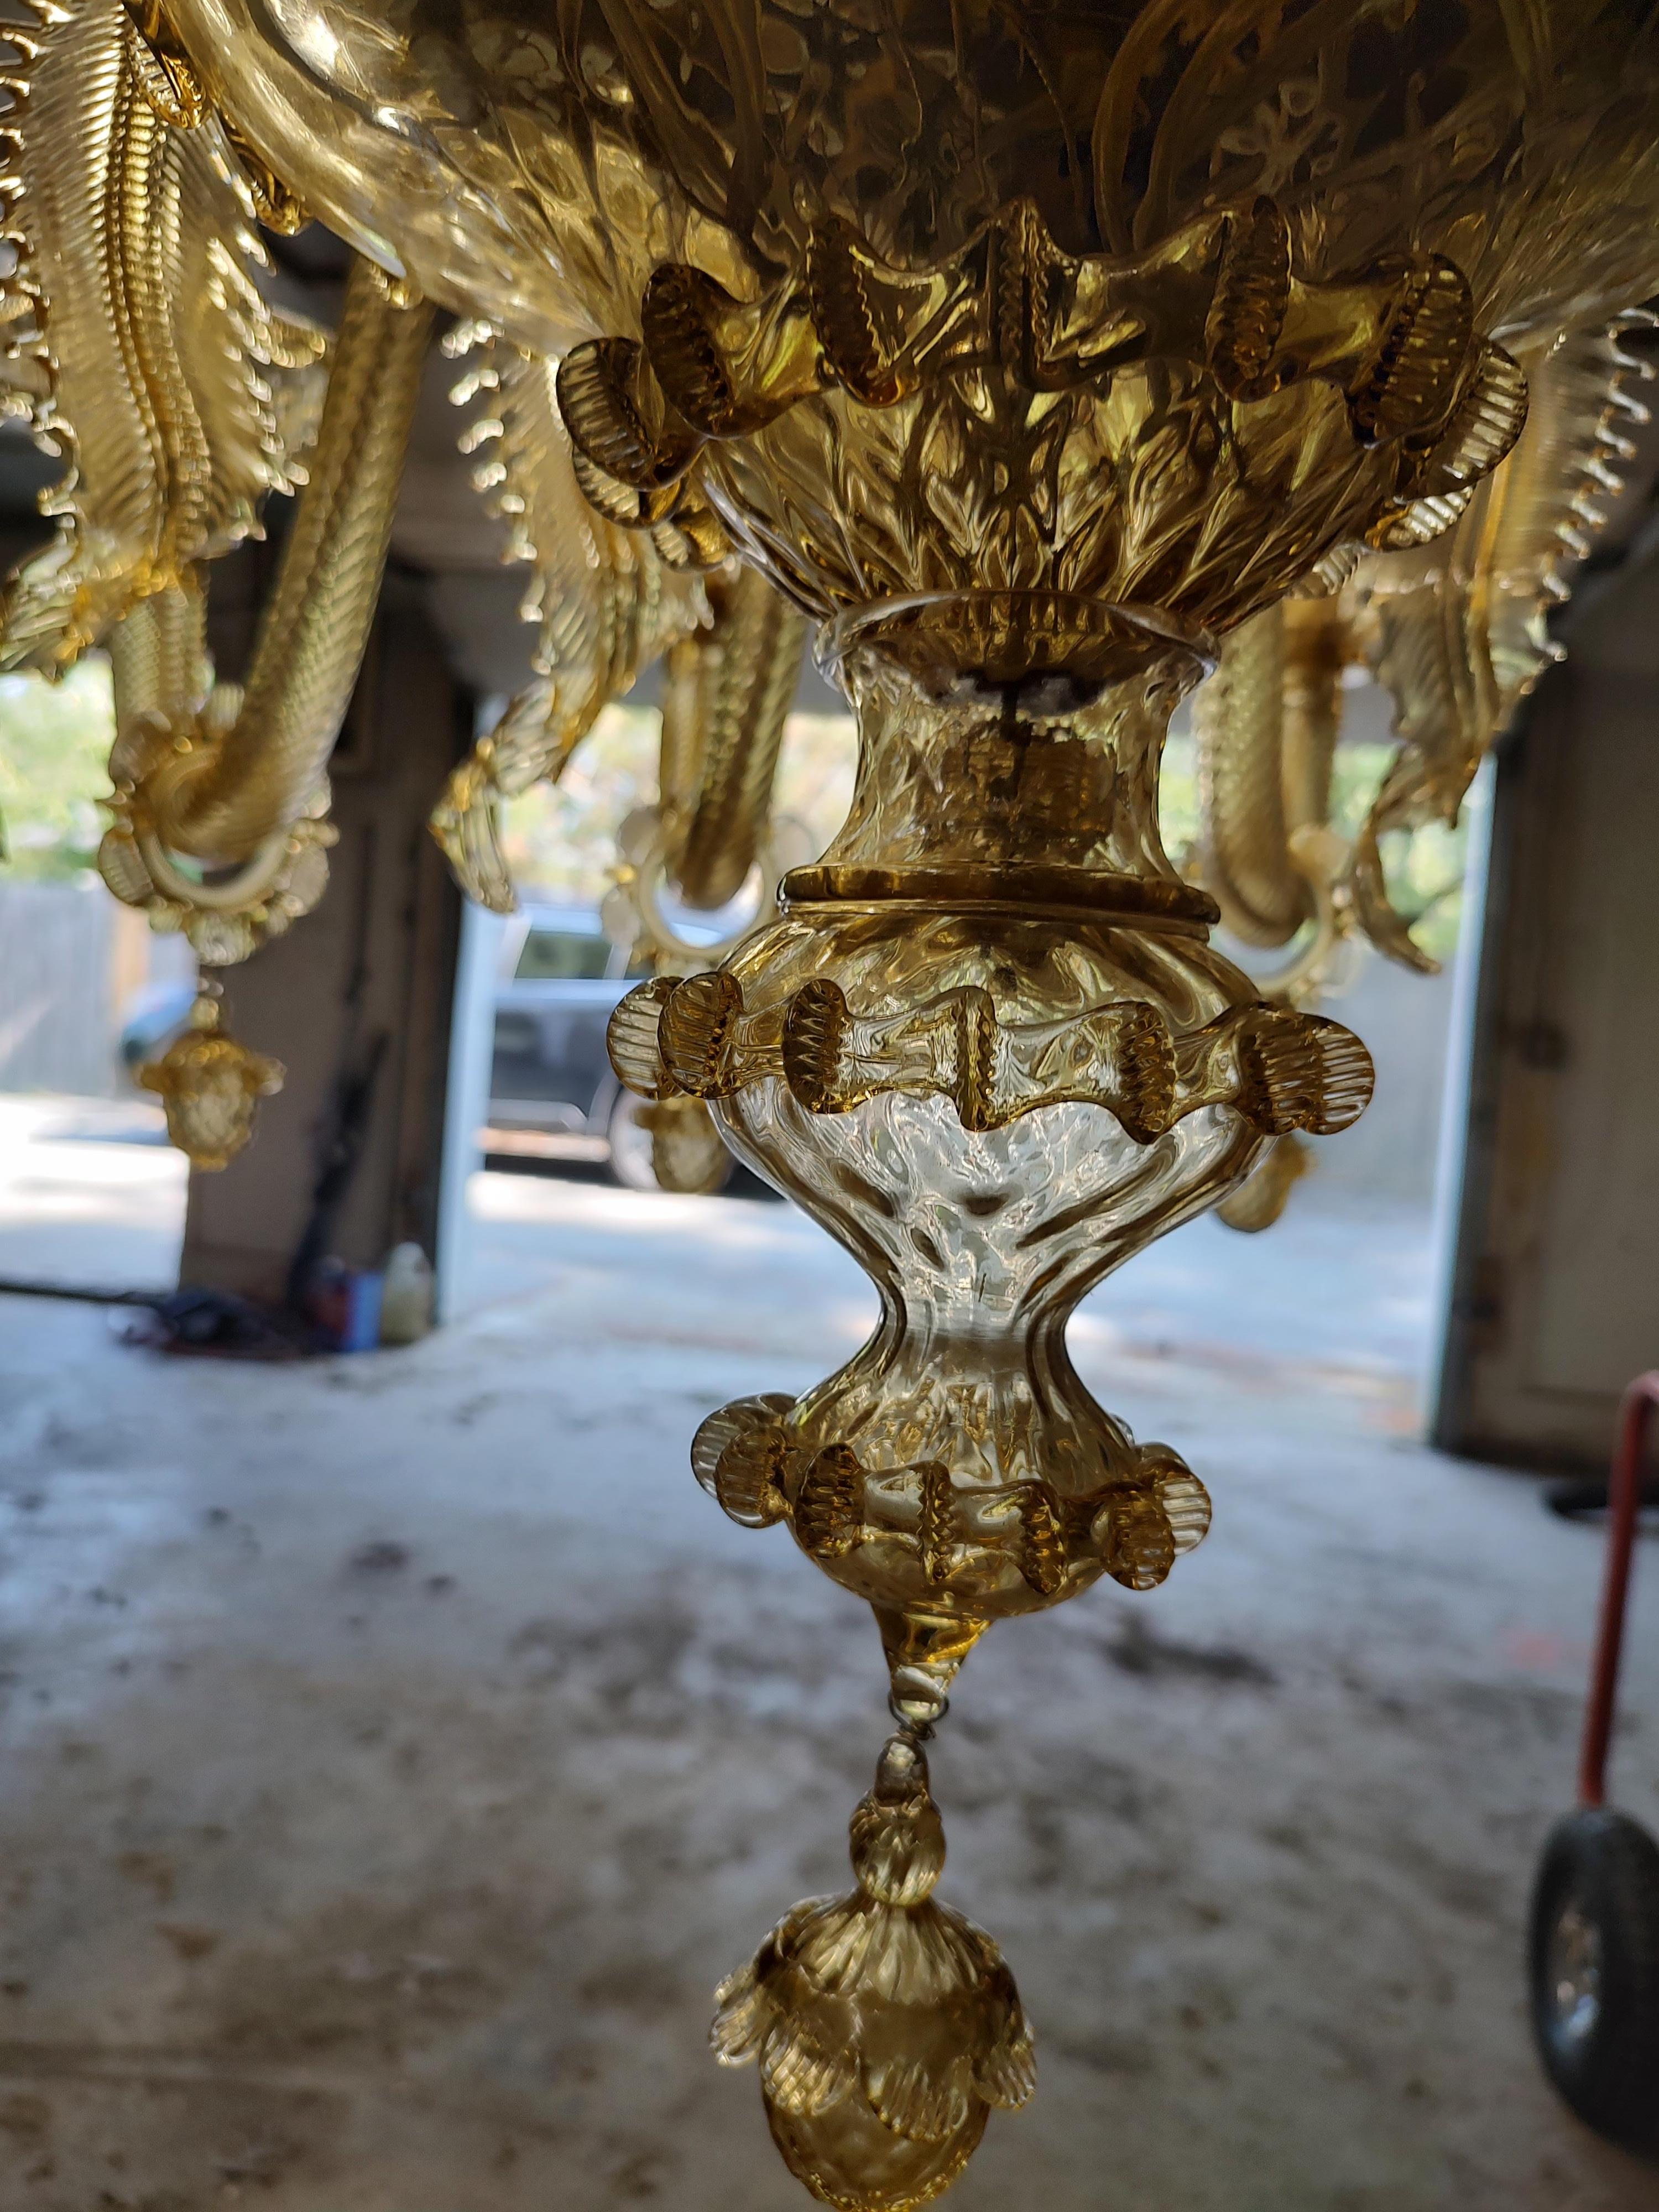 Fabulous and totally Grand, twelve arm Venetian Chandelier from the island of Murano. New wiring and UL listed ready to be hung. No damage or missing pieces, no replacement pieces either. All original. Spectacular glass floral pieces in the center